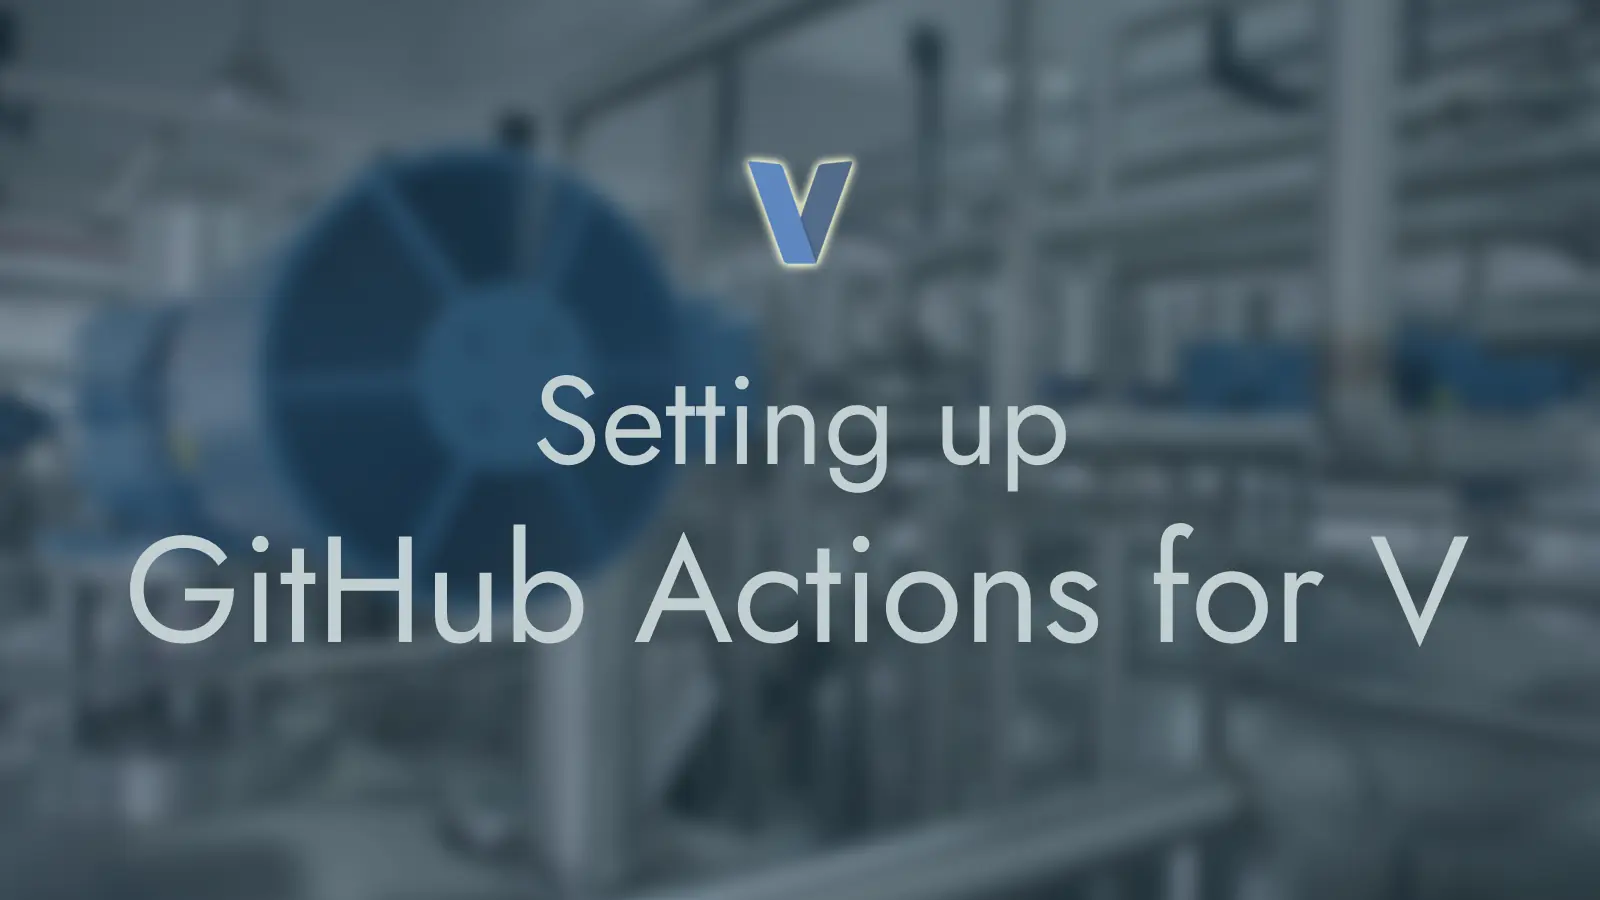 This article will walk you through setting up GitHub Actions for V. We begin with a primer on CI/CD, the various benefits and drawbacks. Then we make use of the Setup V action to set up a CI/CD environment for V, how to set it up, and how to use it. We will close with a link to a more sophisticated example.